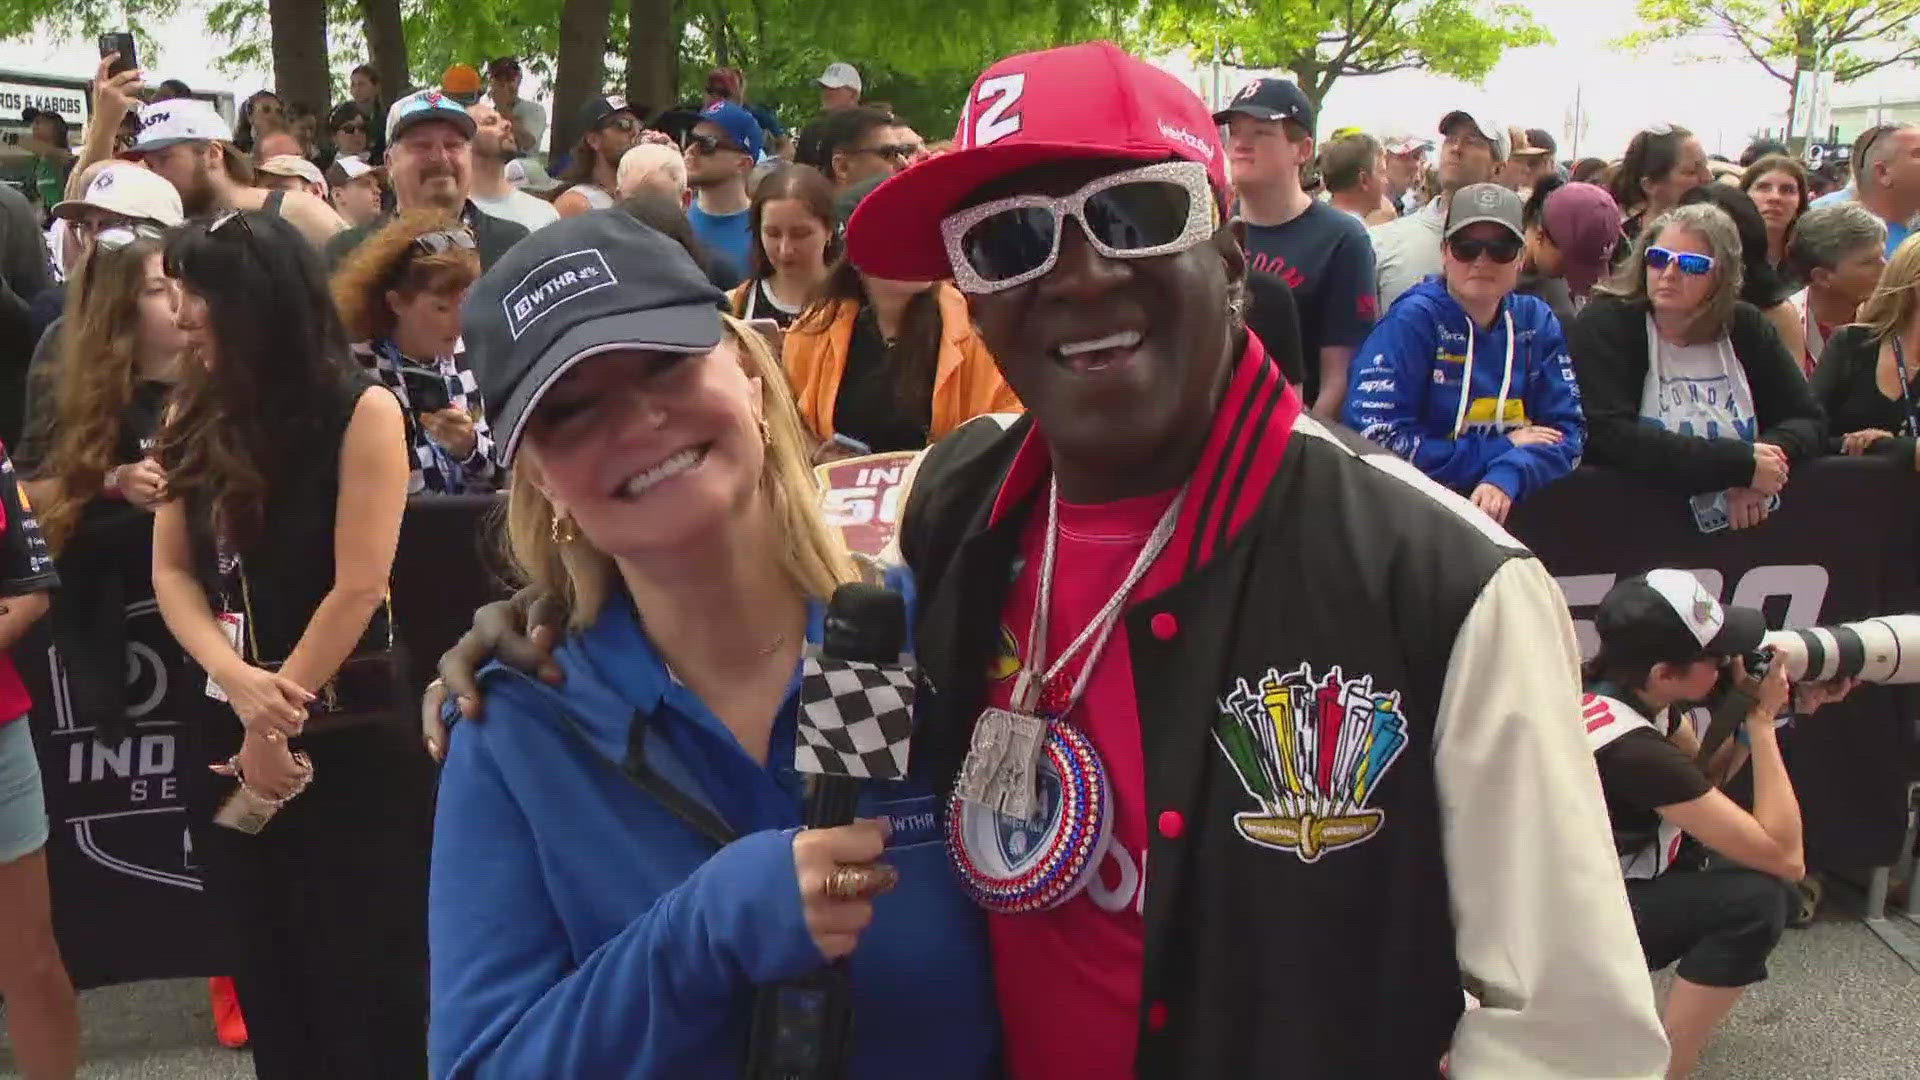 Flavor Flav joins 13News' Laura Steele to talk about why he is rooting for Will Power to win the Indy 500.